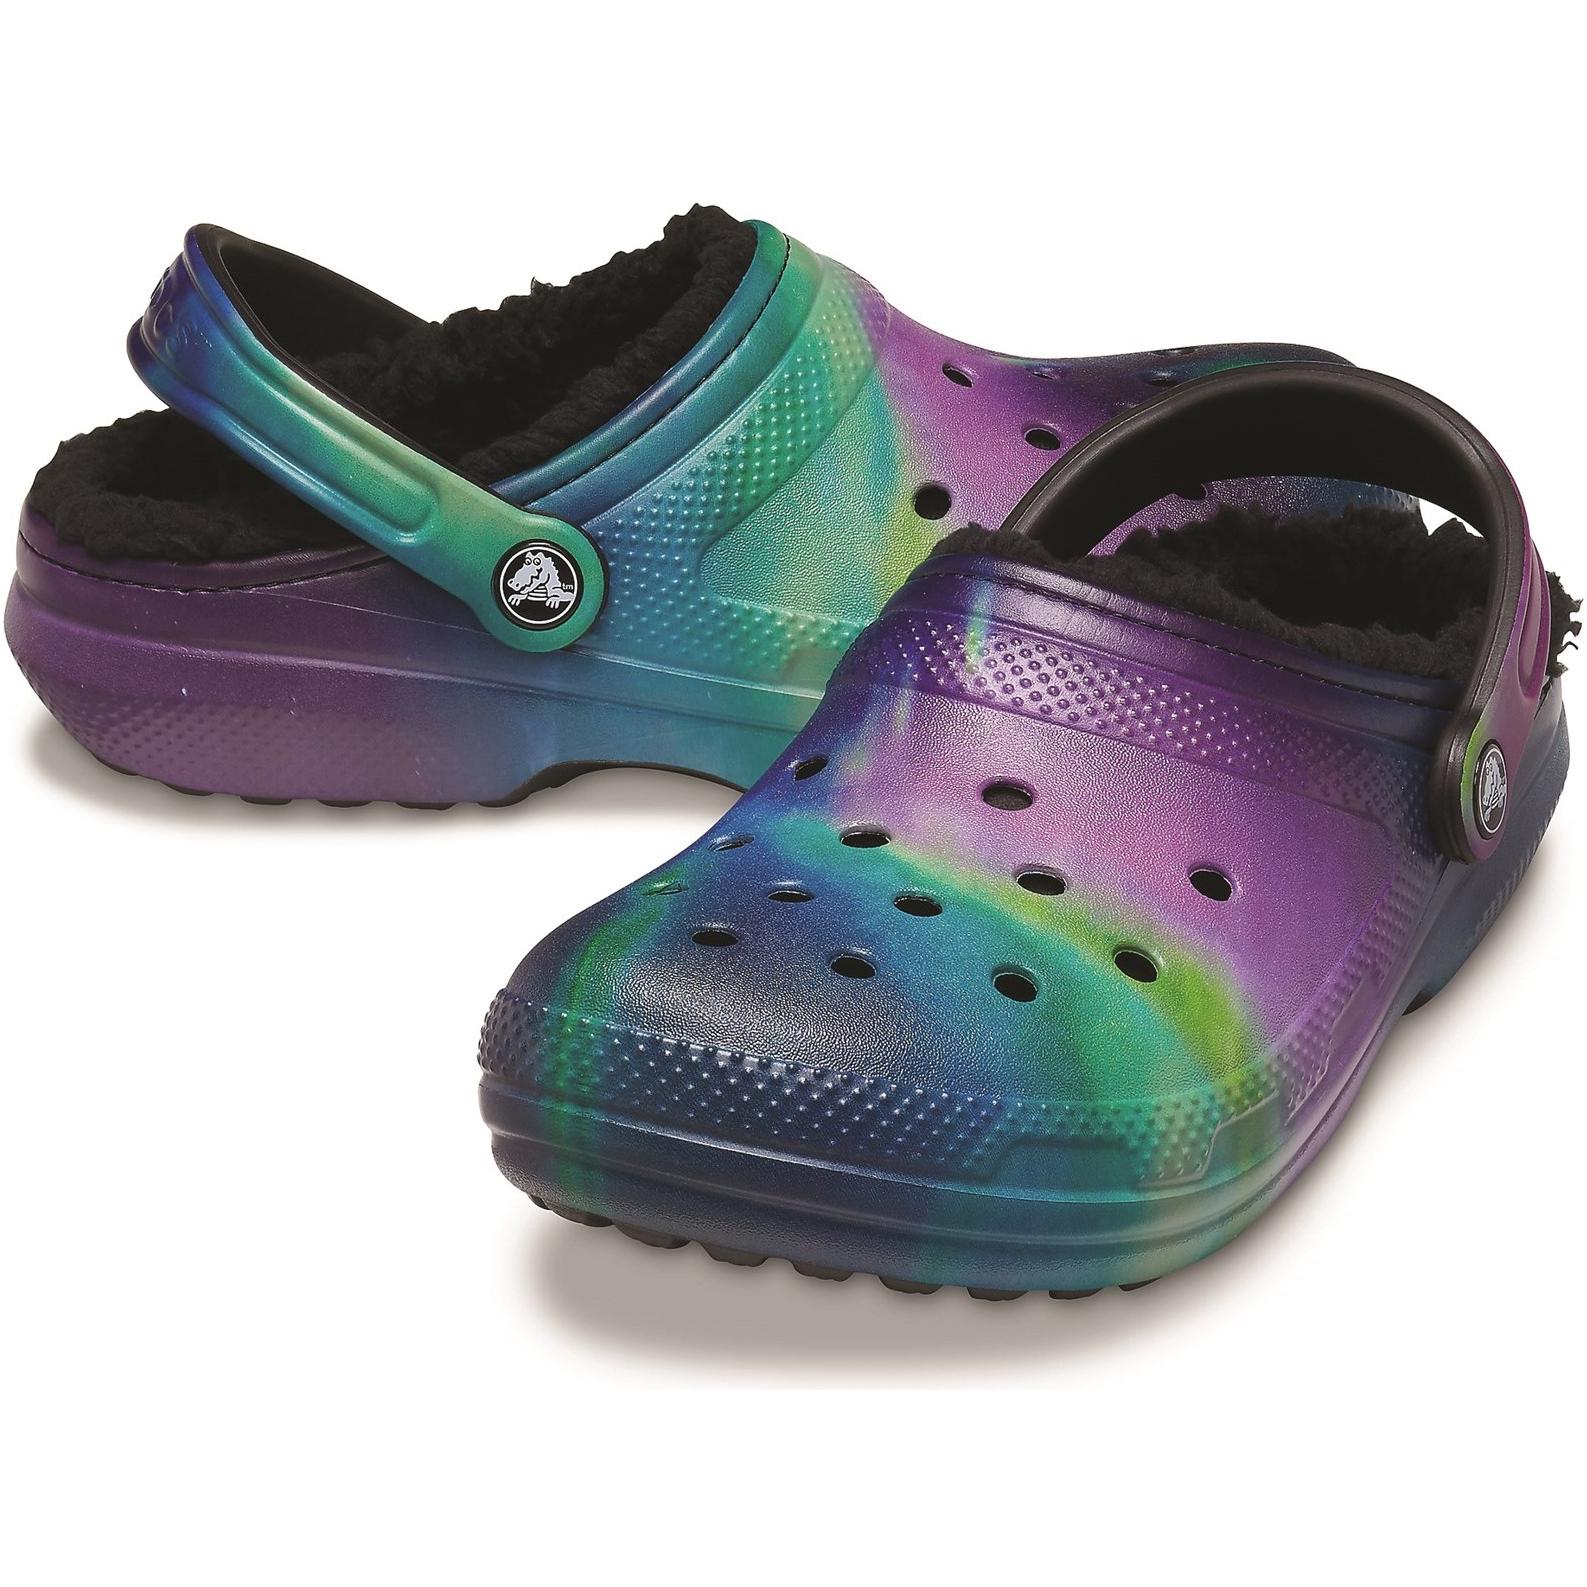 Crocs Classic Lined Out of this World Clog Sandals